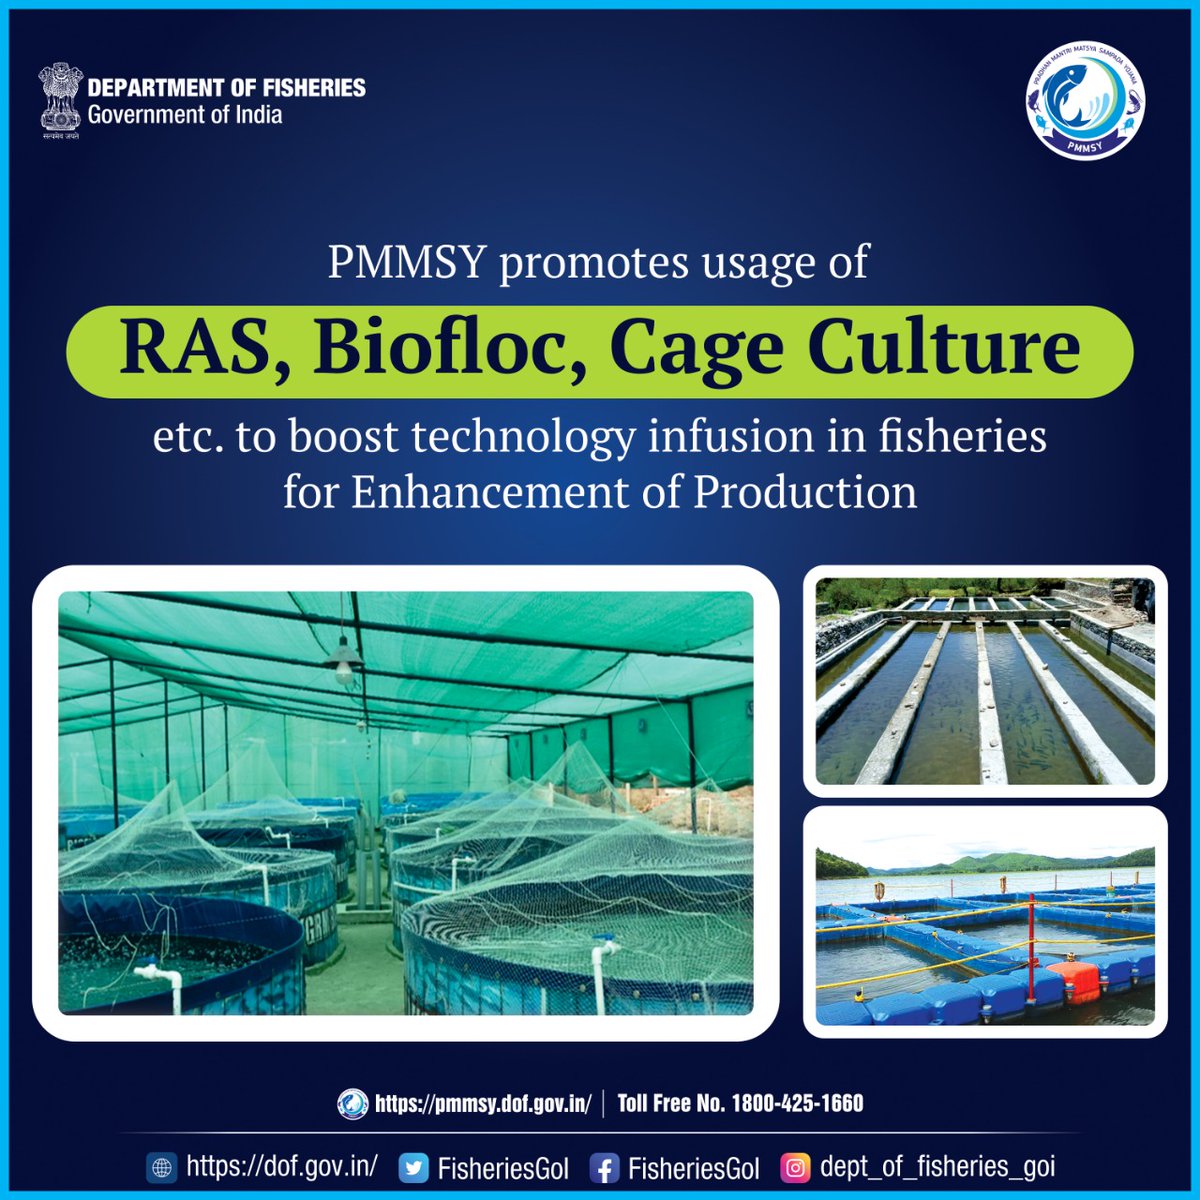 Technology invention and water management are emphasized under #PMMSY towards harvesting ‘more crop per drop’, both in #inland and #marine fisheries.
.
.
#InlandFisheries #MarneFisheries #TechnologyInfusion #WaterManagement #ProductionGrowth